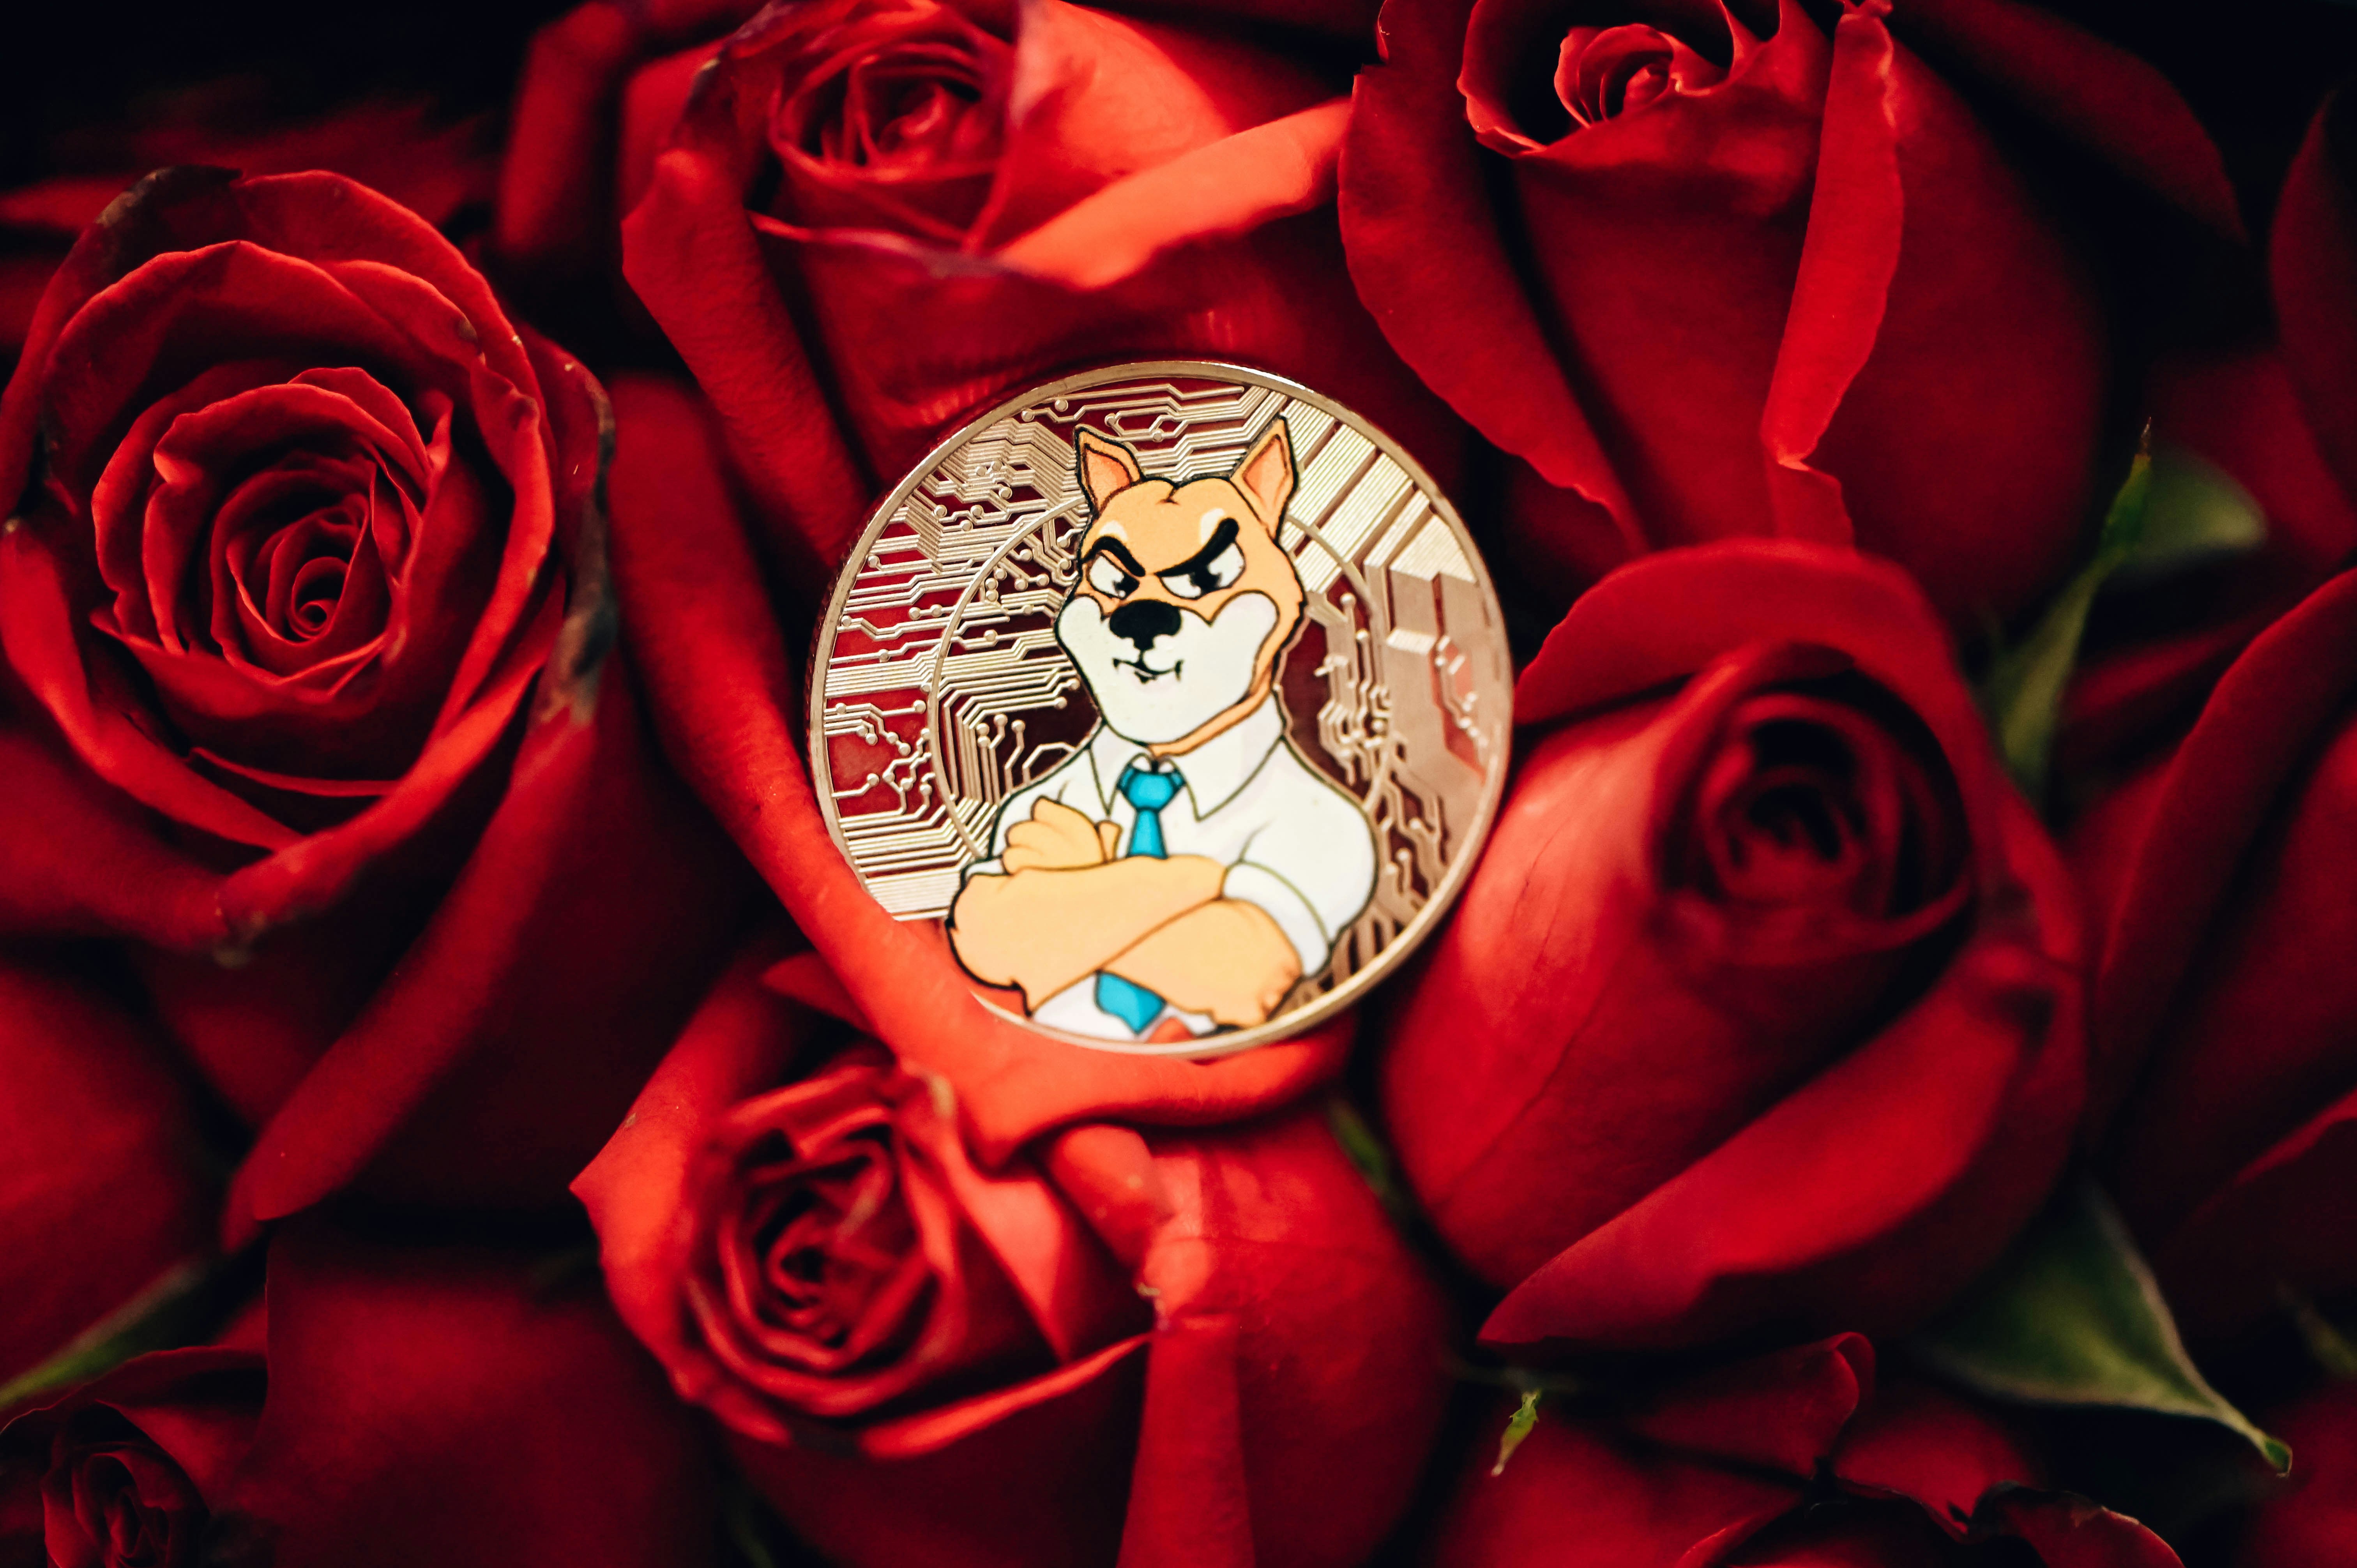 A SHIB coin surrounded by red roses